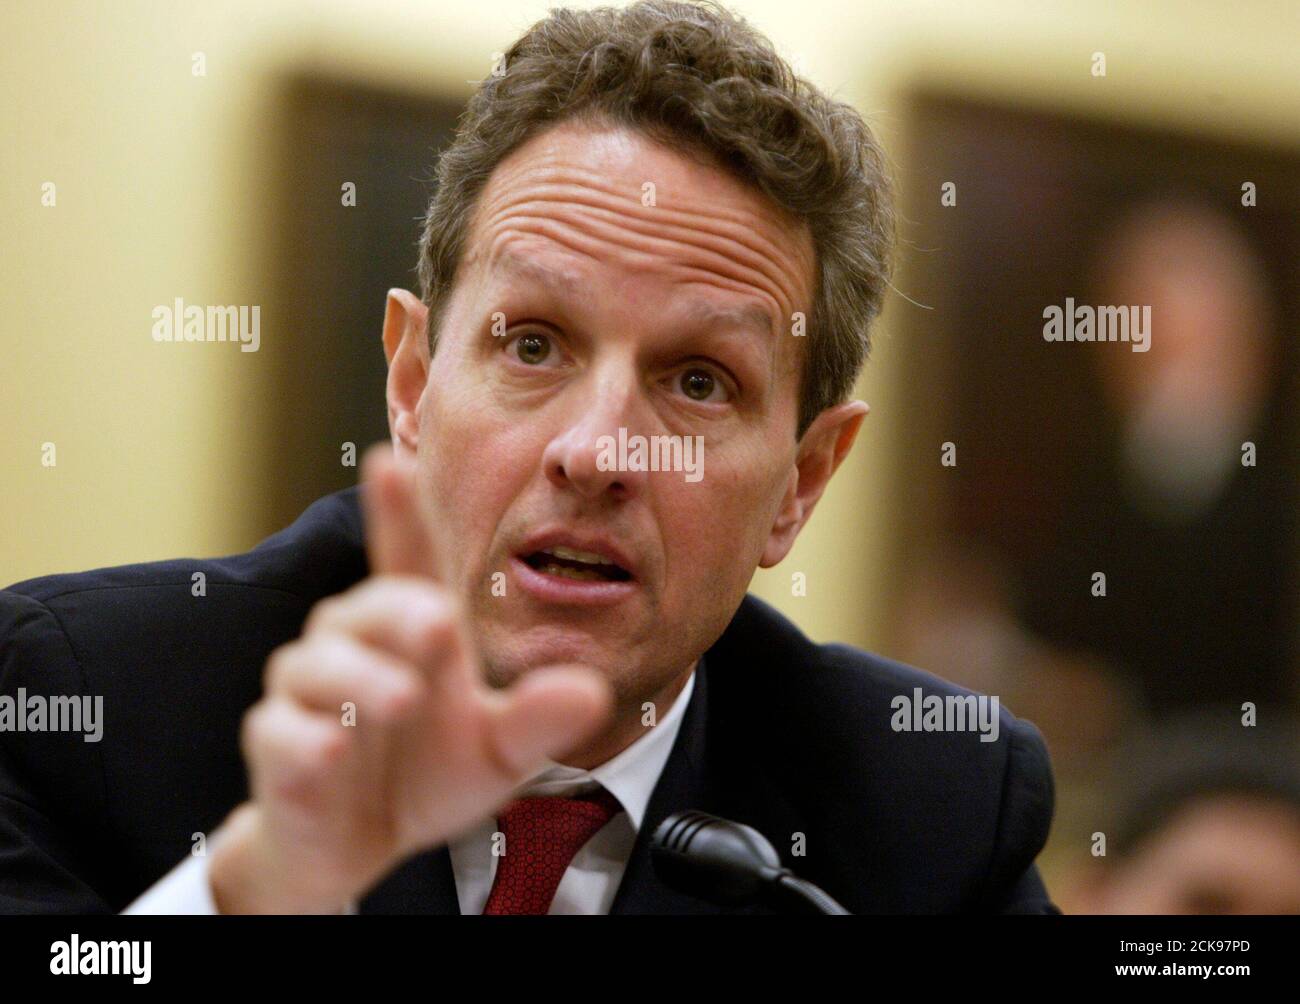 U.S. Treasury Secretary Timothy Geithner testifies about the Obama administration's budget proposals and goals for economic recovery and reform before the House Appropriations Subcommittee on General Government and Financial Services in Washington, May 21, 2009. Geithner said that a bailout for banks was steadying the financial system but care must be taken to ensure that normal market forces are allowed to operate.  REUTERS/Jim Bourg   (UNITED STATES BUSINESS POLITICS IMAGES OF THE DAY) Stock Photo